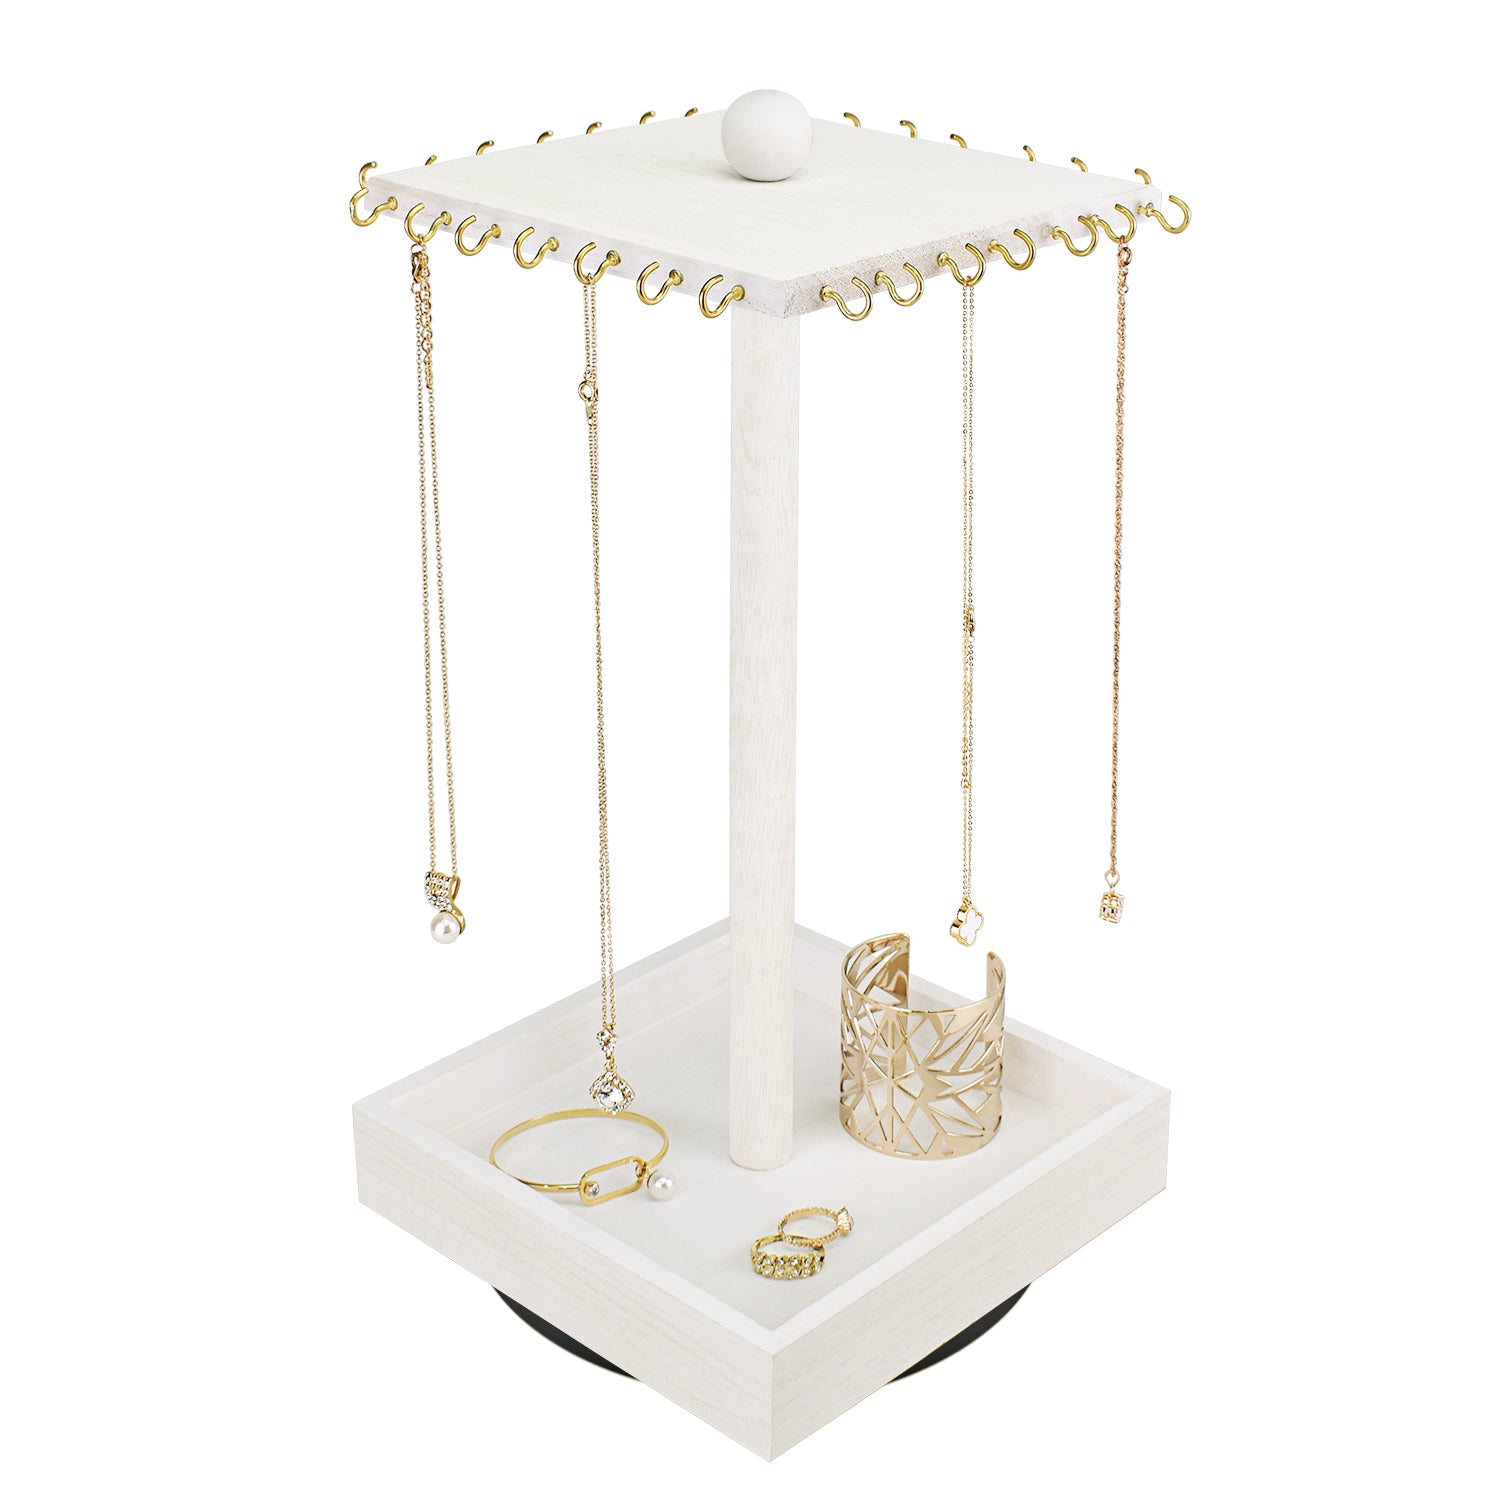 WD5062 Wooden Rotating Two-Sided Jewelry Display Stand 32 Hooks